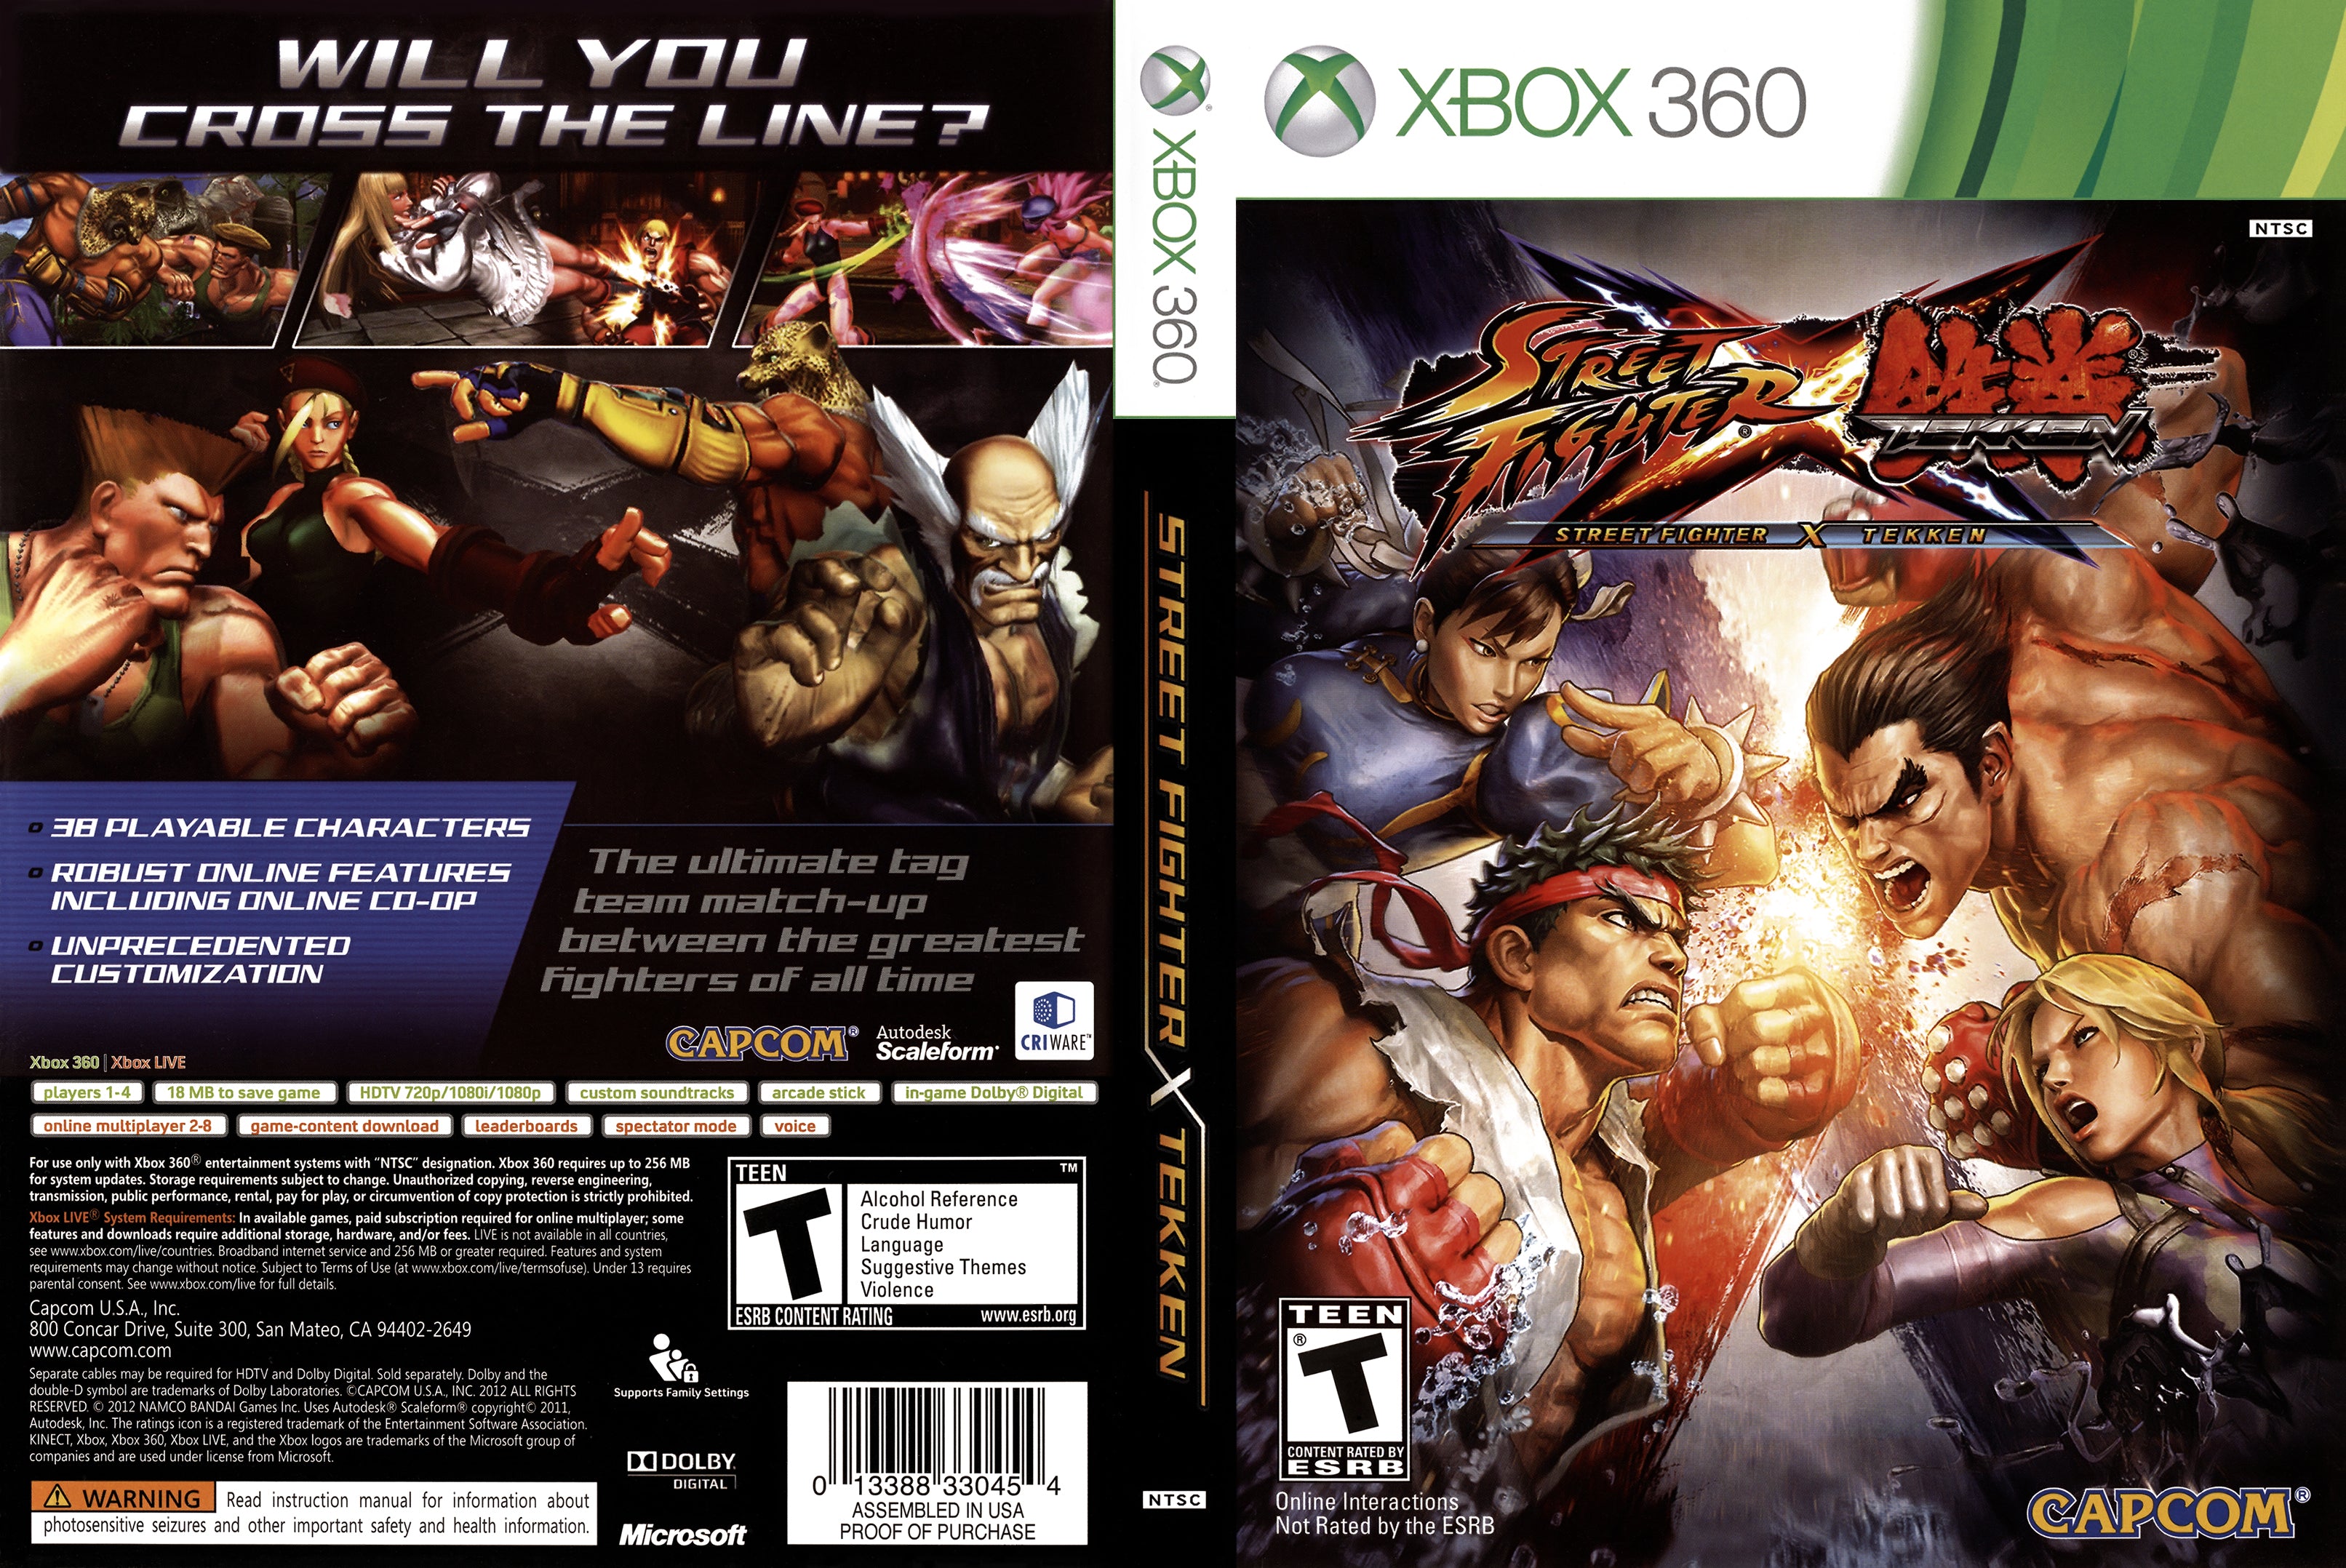 Street Fighter 5 Xbox One